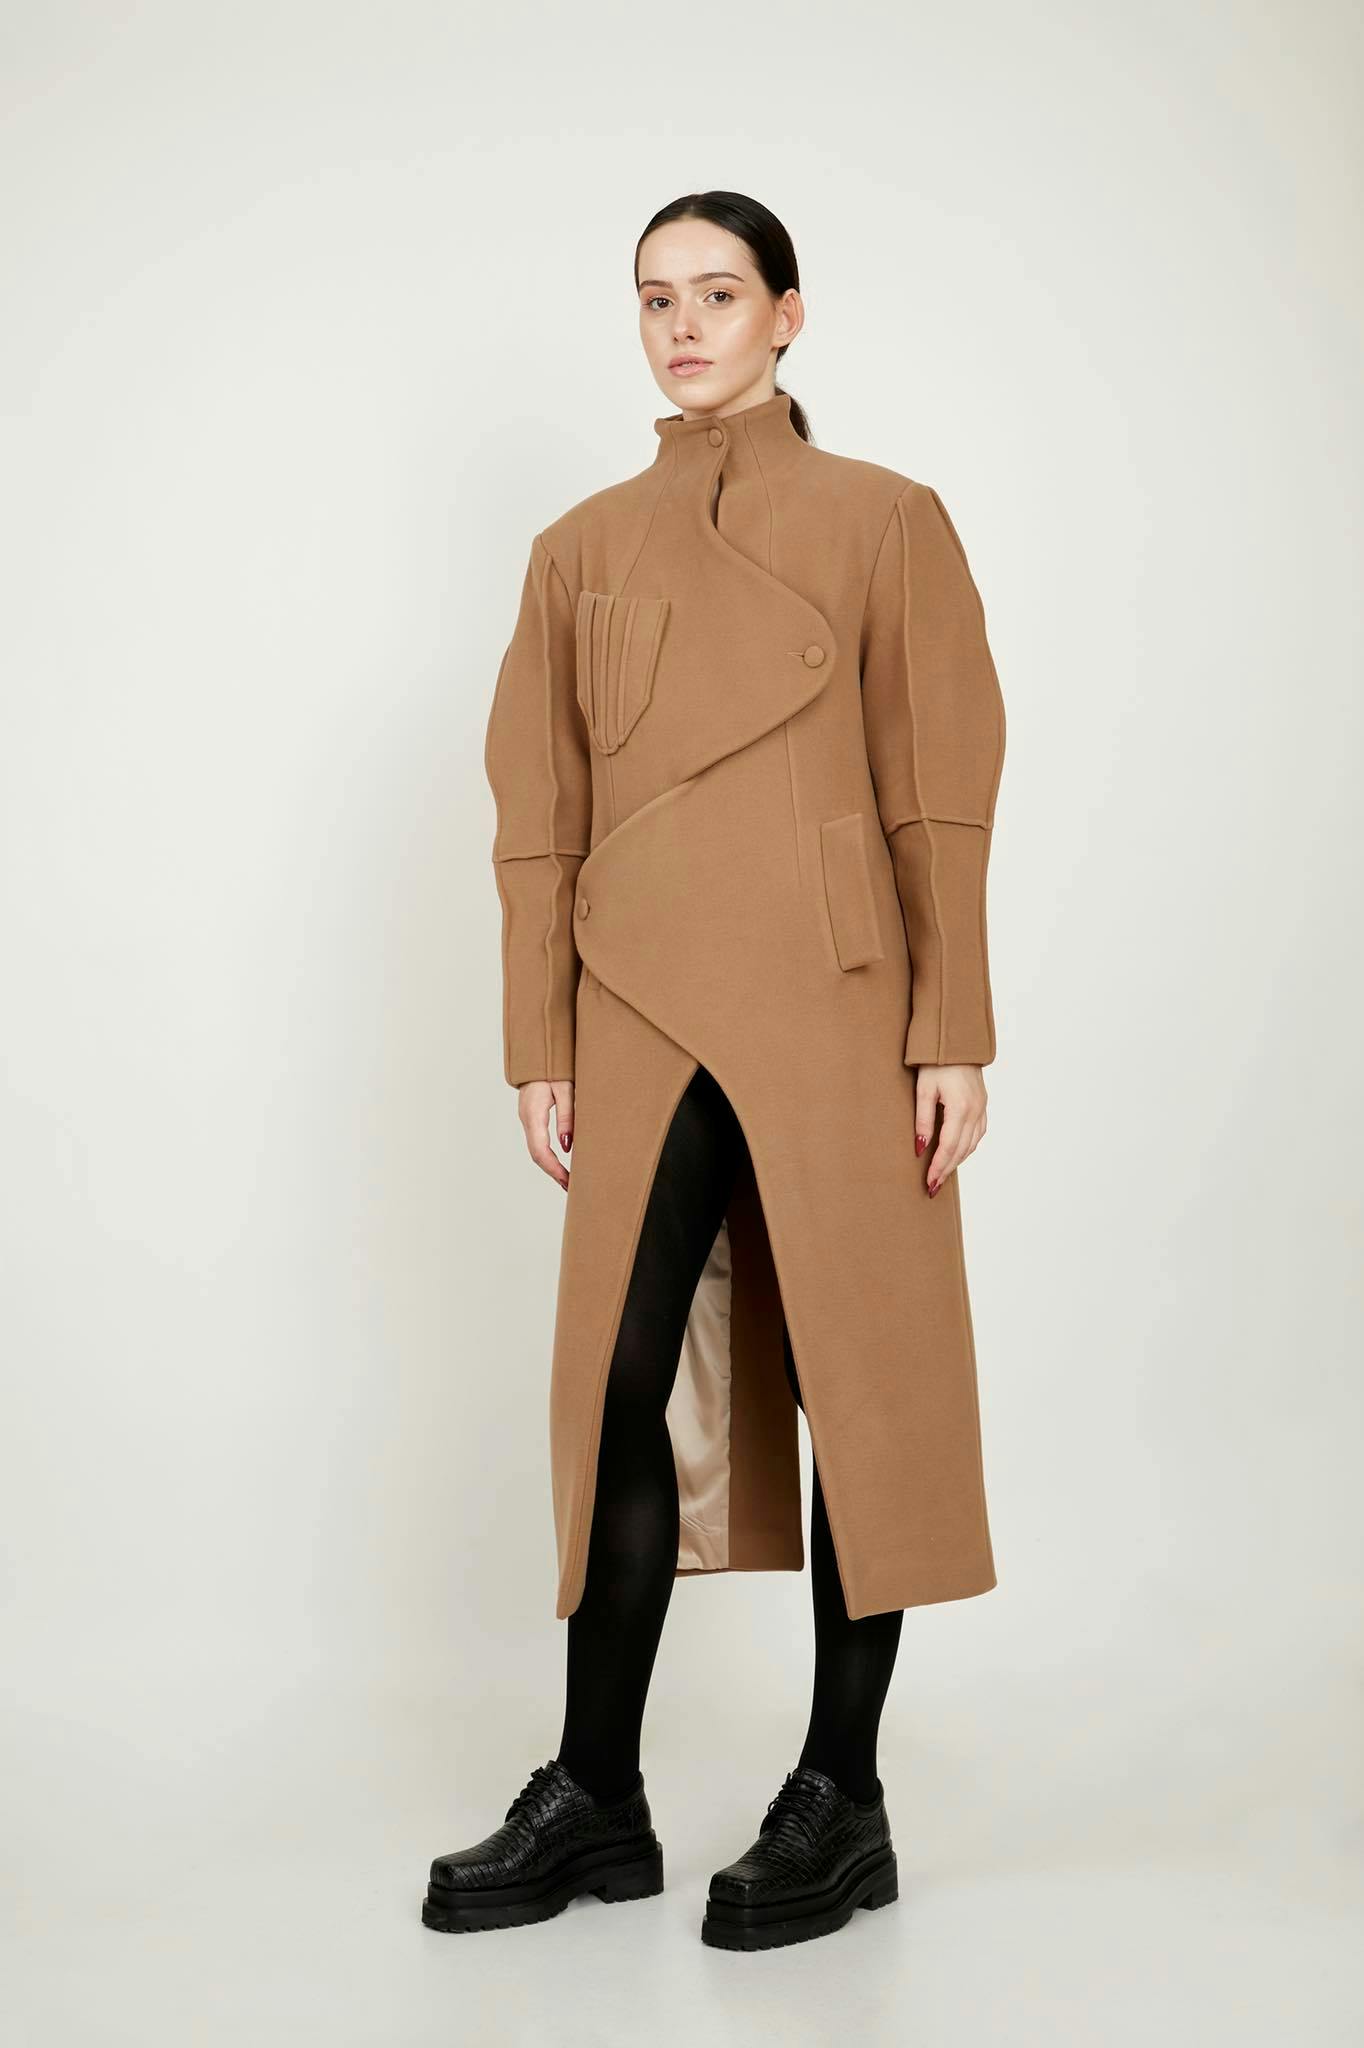 SANDY BROWN COAT, a product by BLIKVANGER